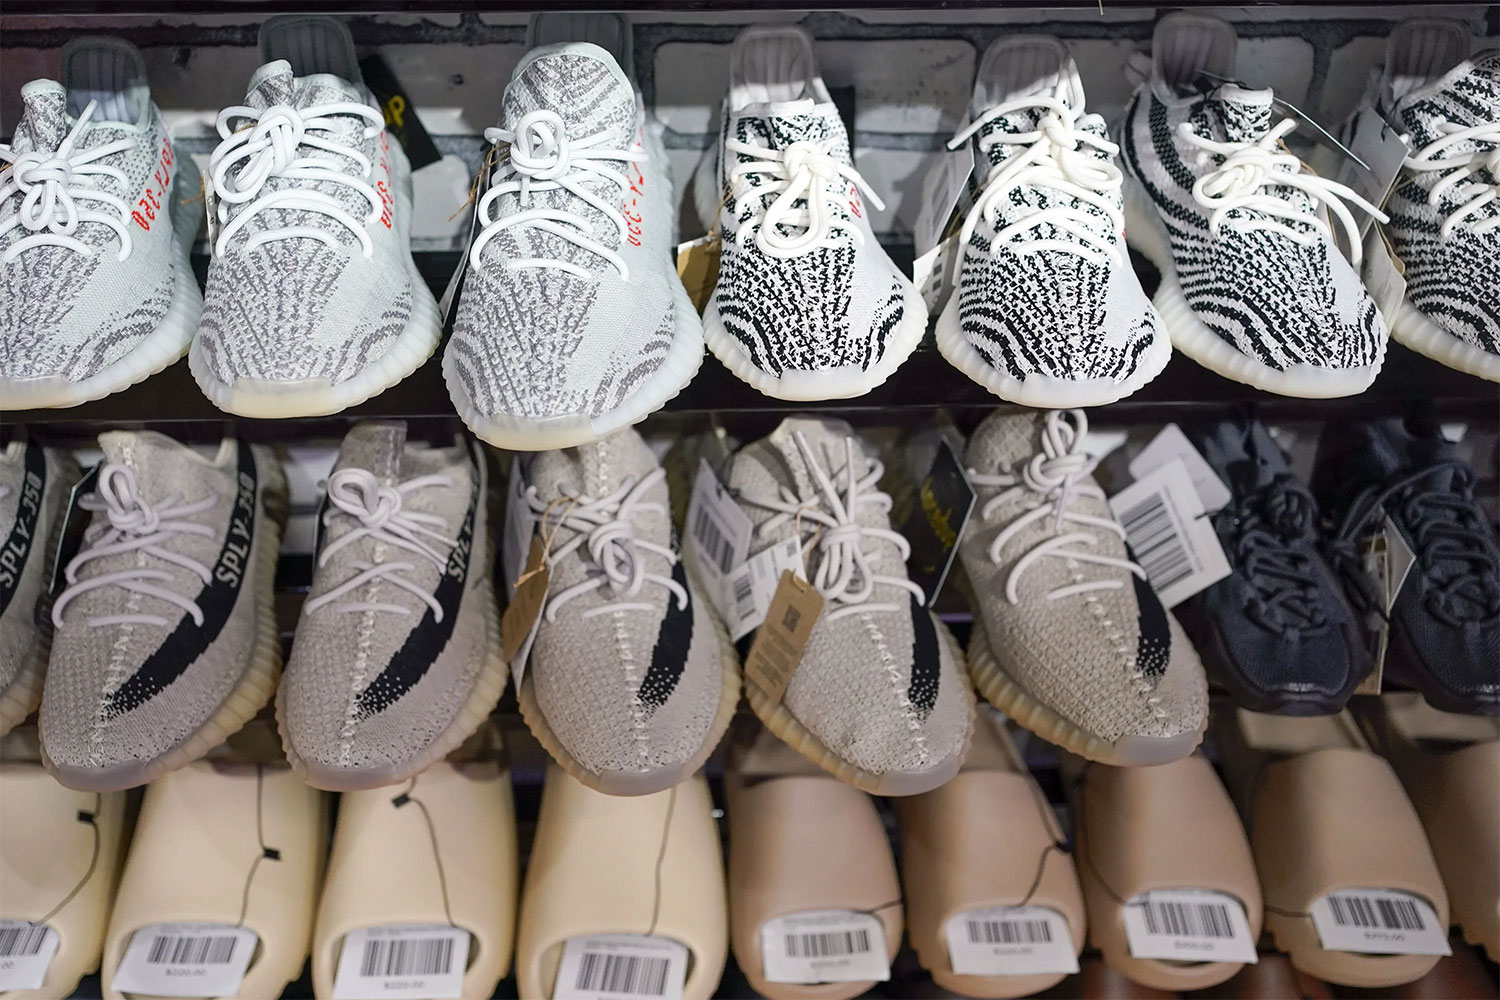 Adidas is estimated to lose $1.3 billion when parting with Kanye West